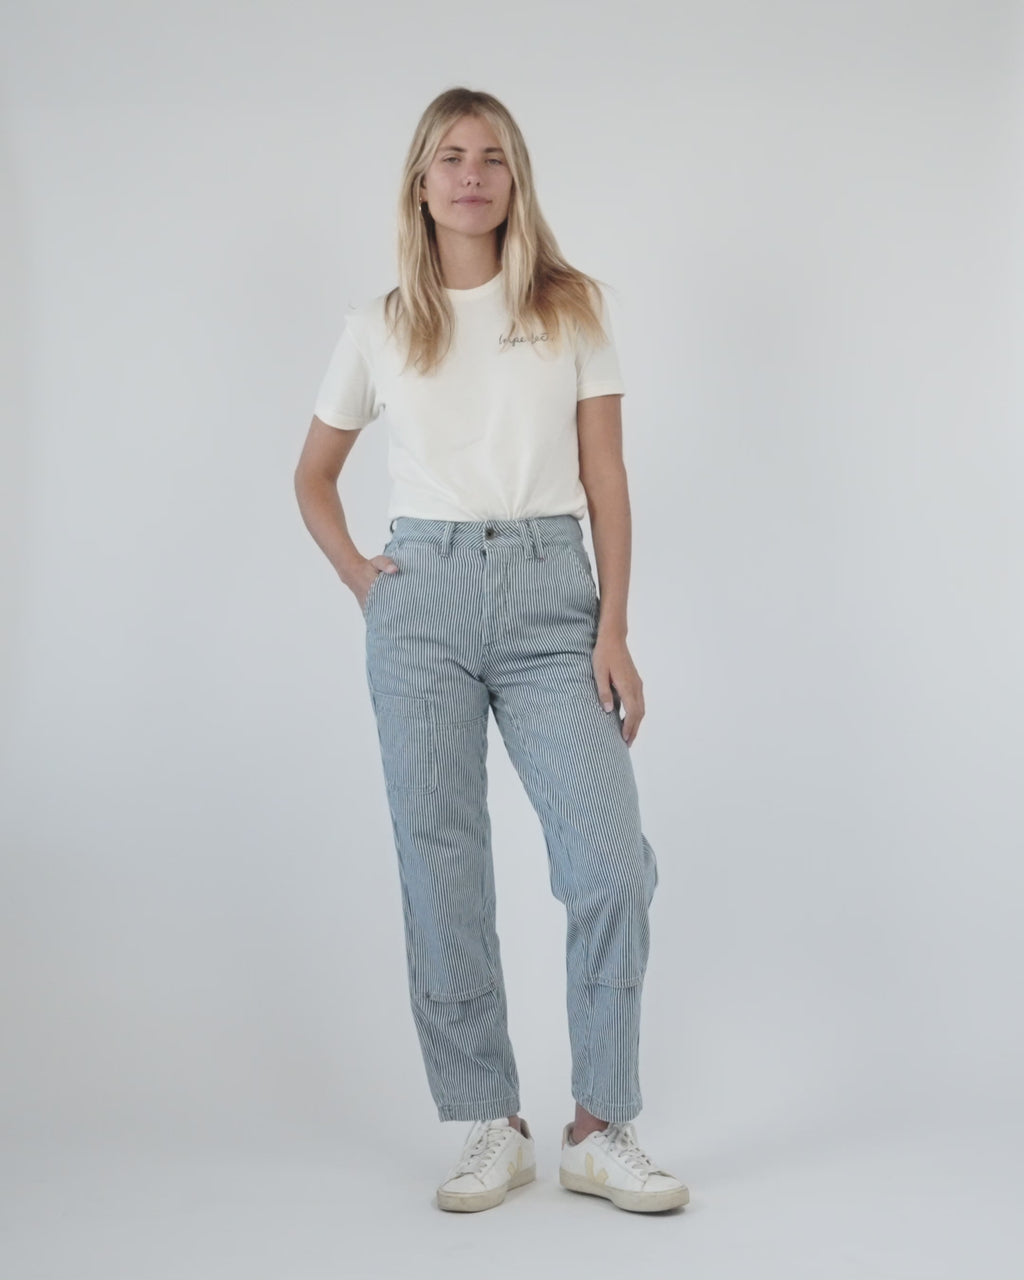 Imperfects - Courier Pant in Indigo Hickory Stripe | Weathered Wash - Womens